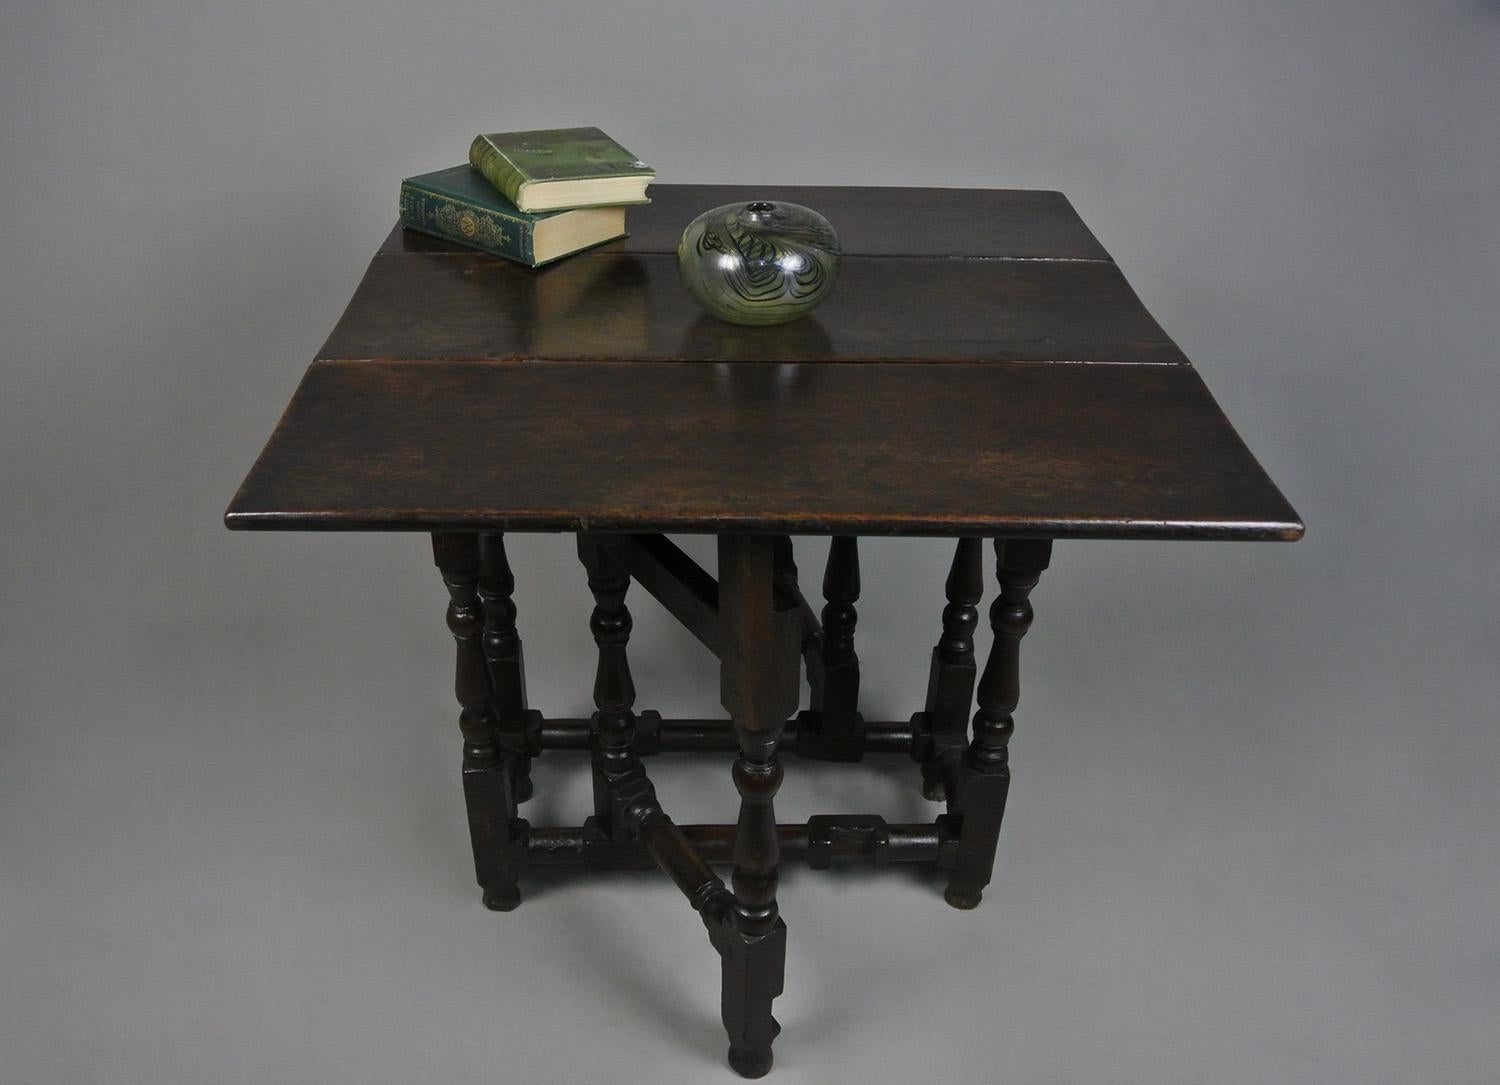 Original Queen Anne Oak Small Supper Table with Provenance c. 1700 In Good Condition For Sale In Heathfield, GB